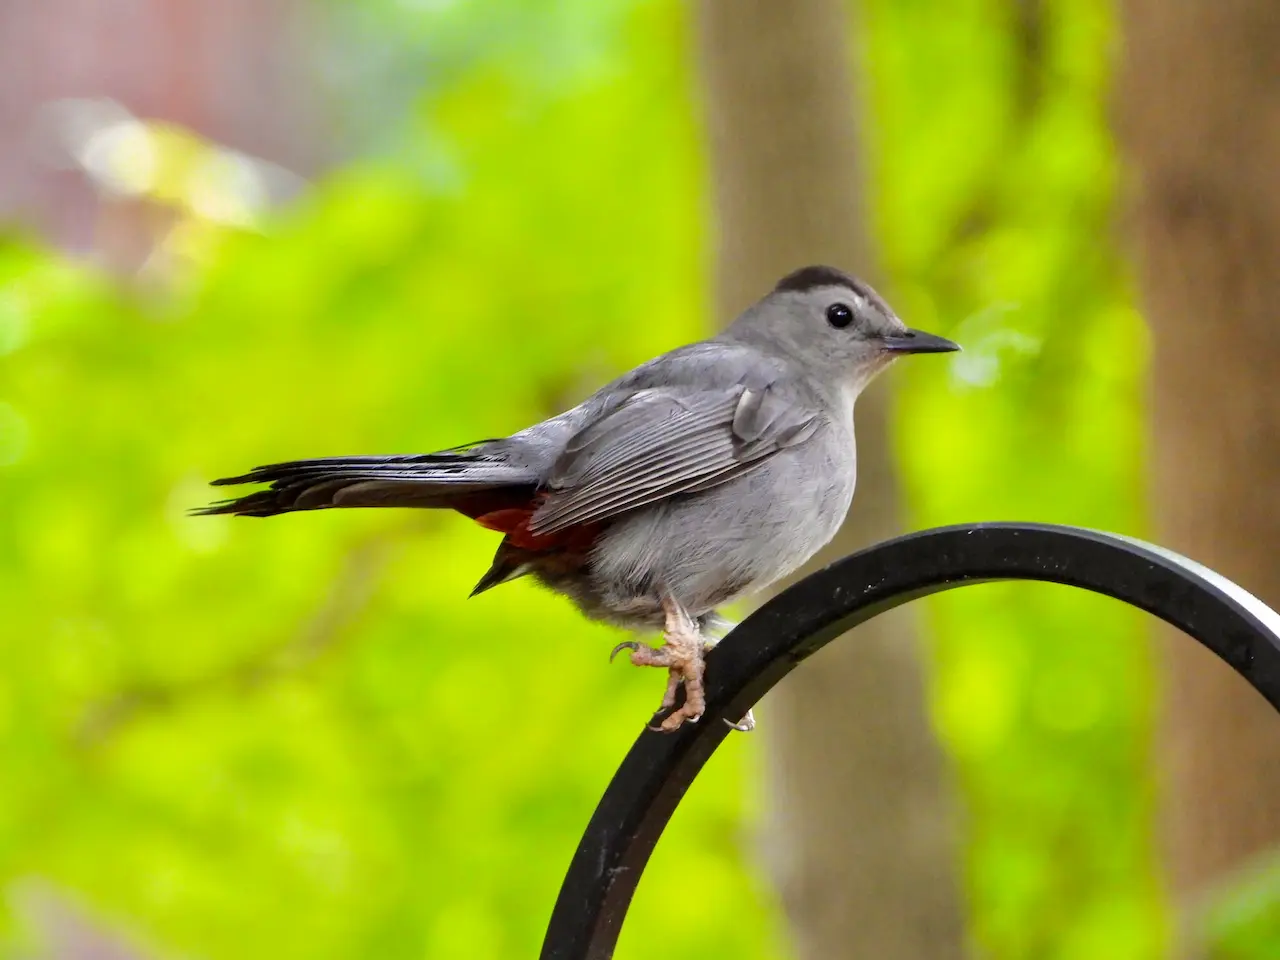 The Grey Catbirds Perched In The Curved Metal